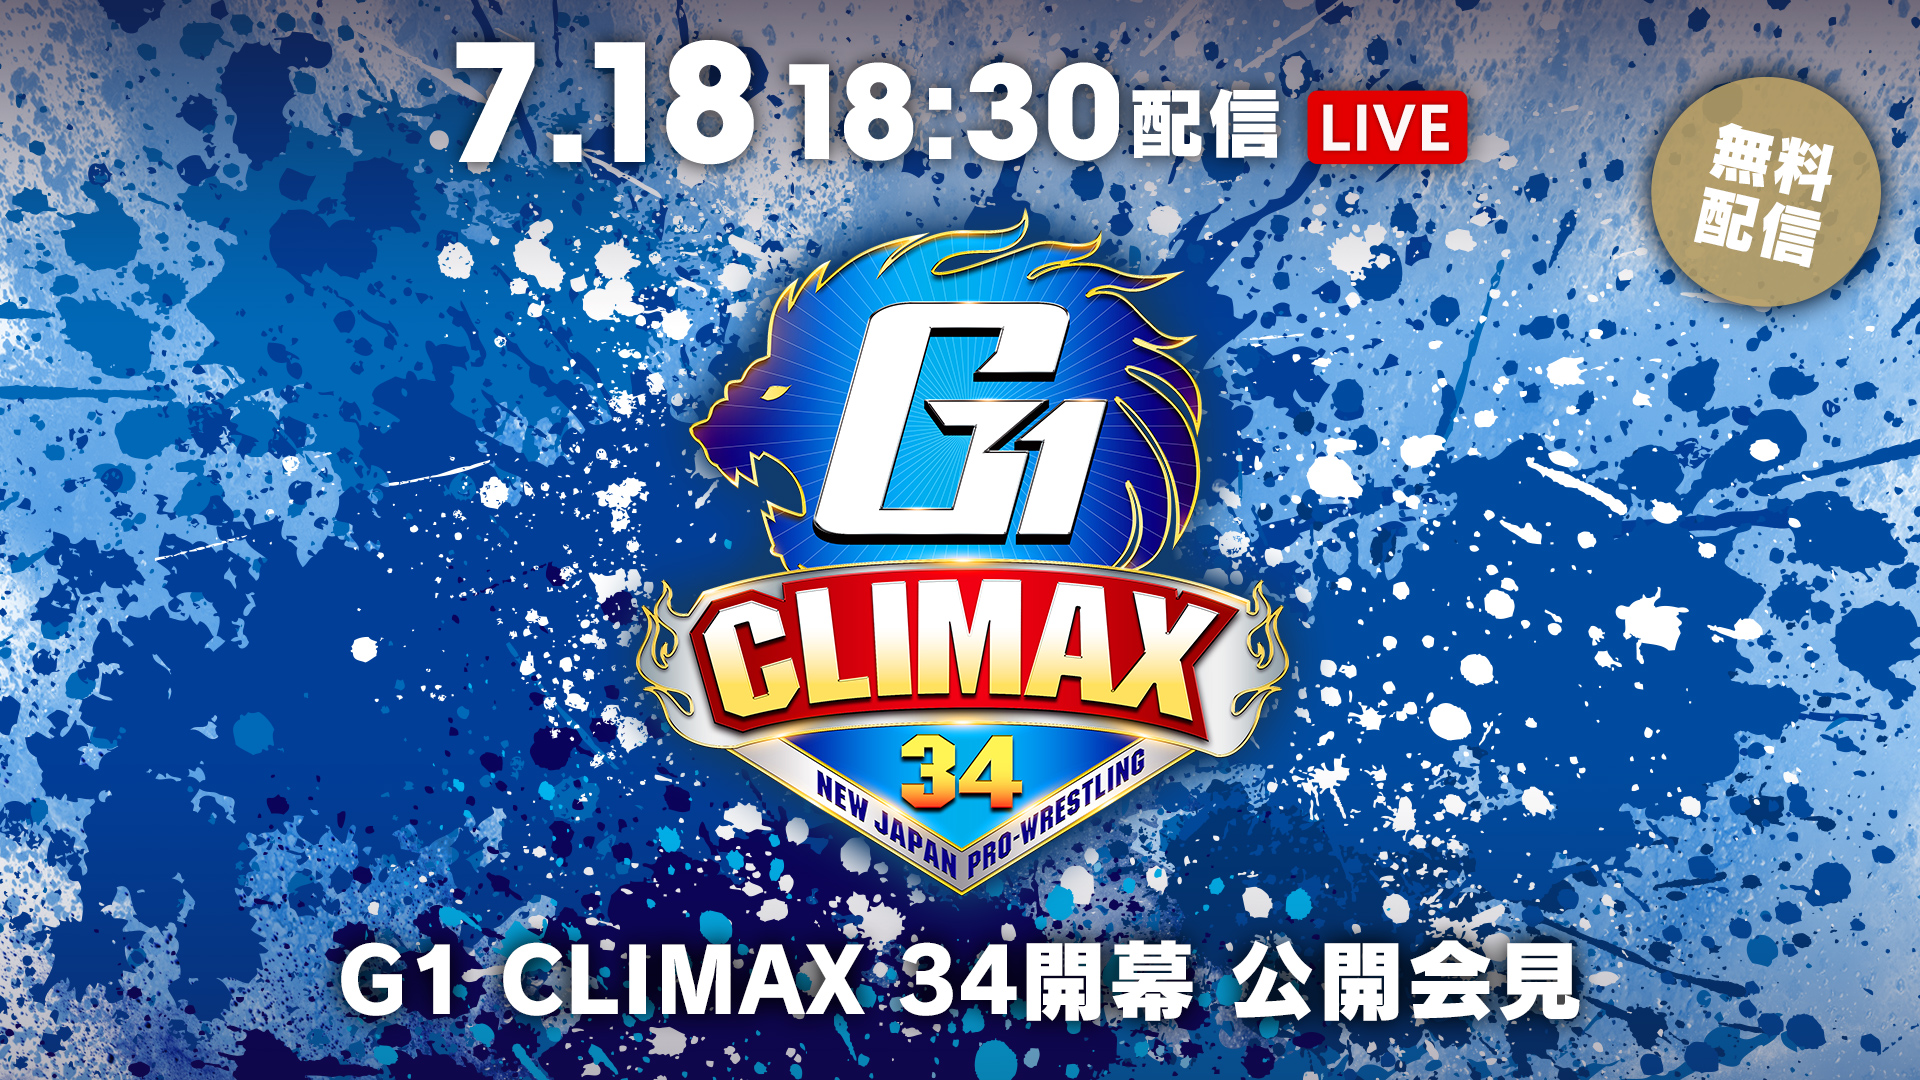 A match graphic advertising the NJPW event "G1 Climax 34."